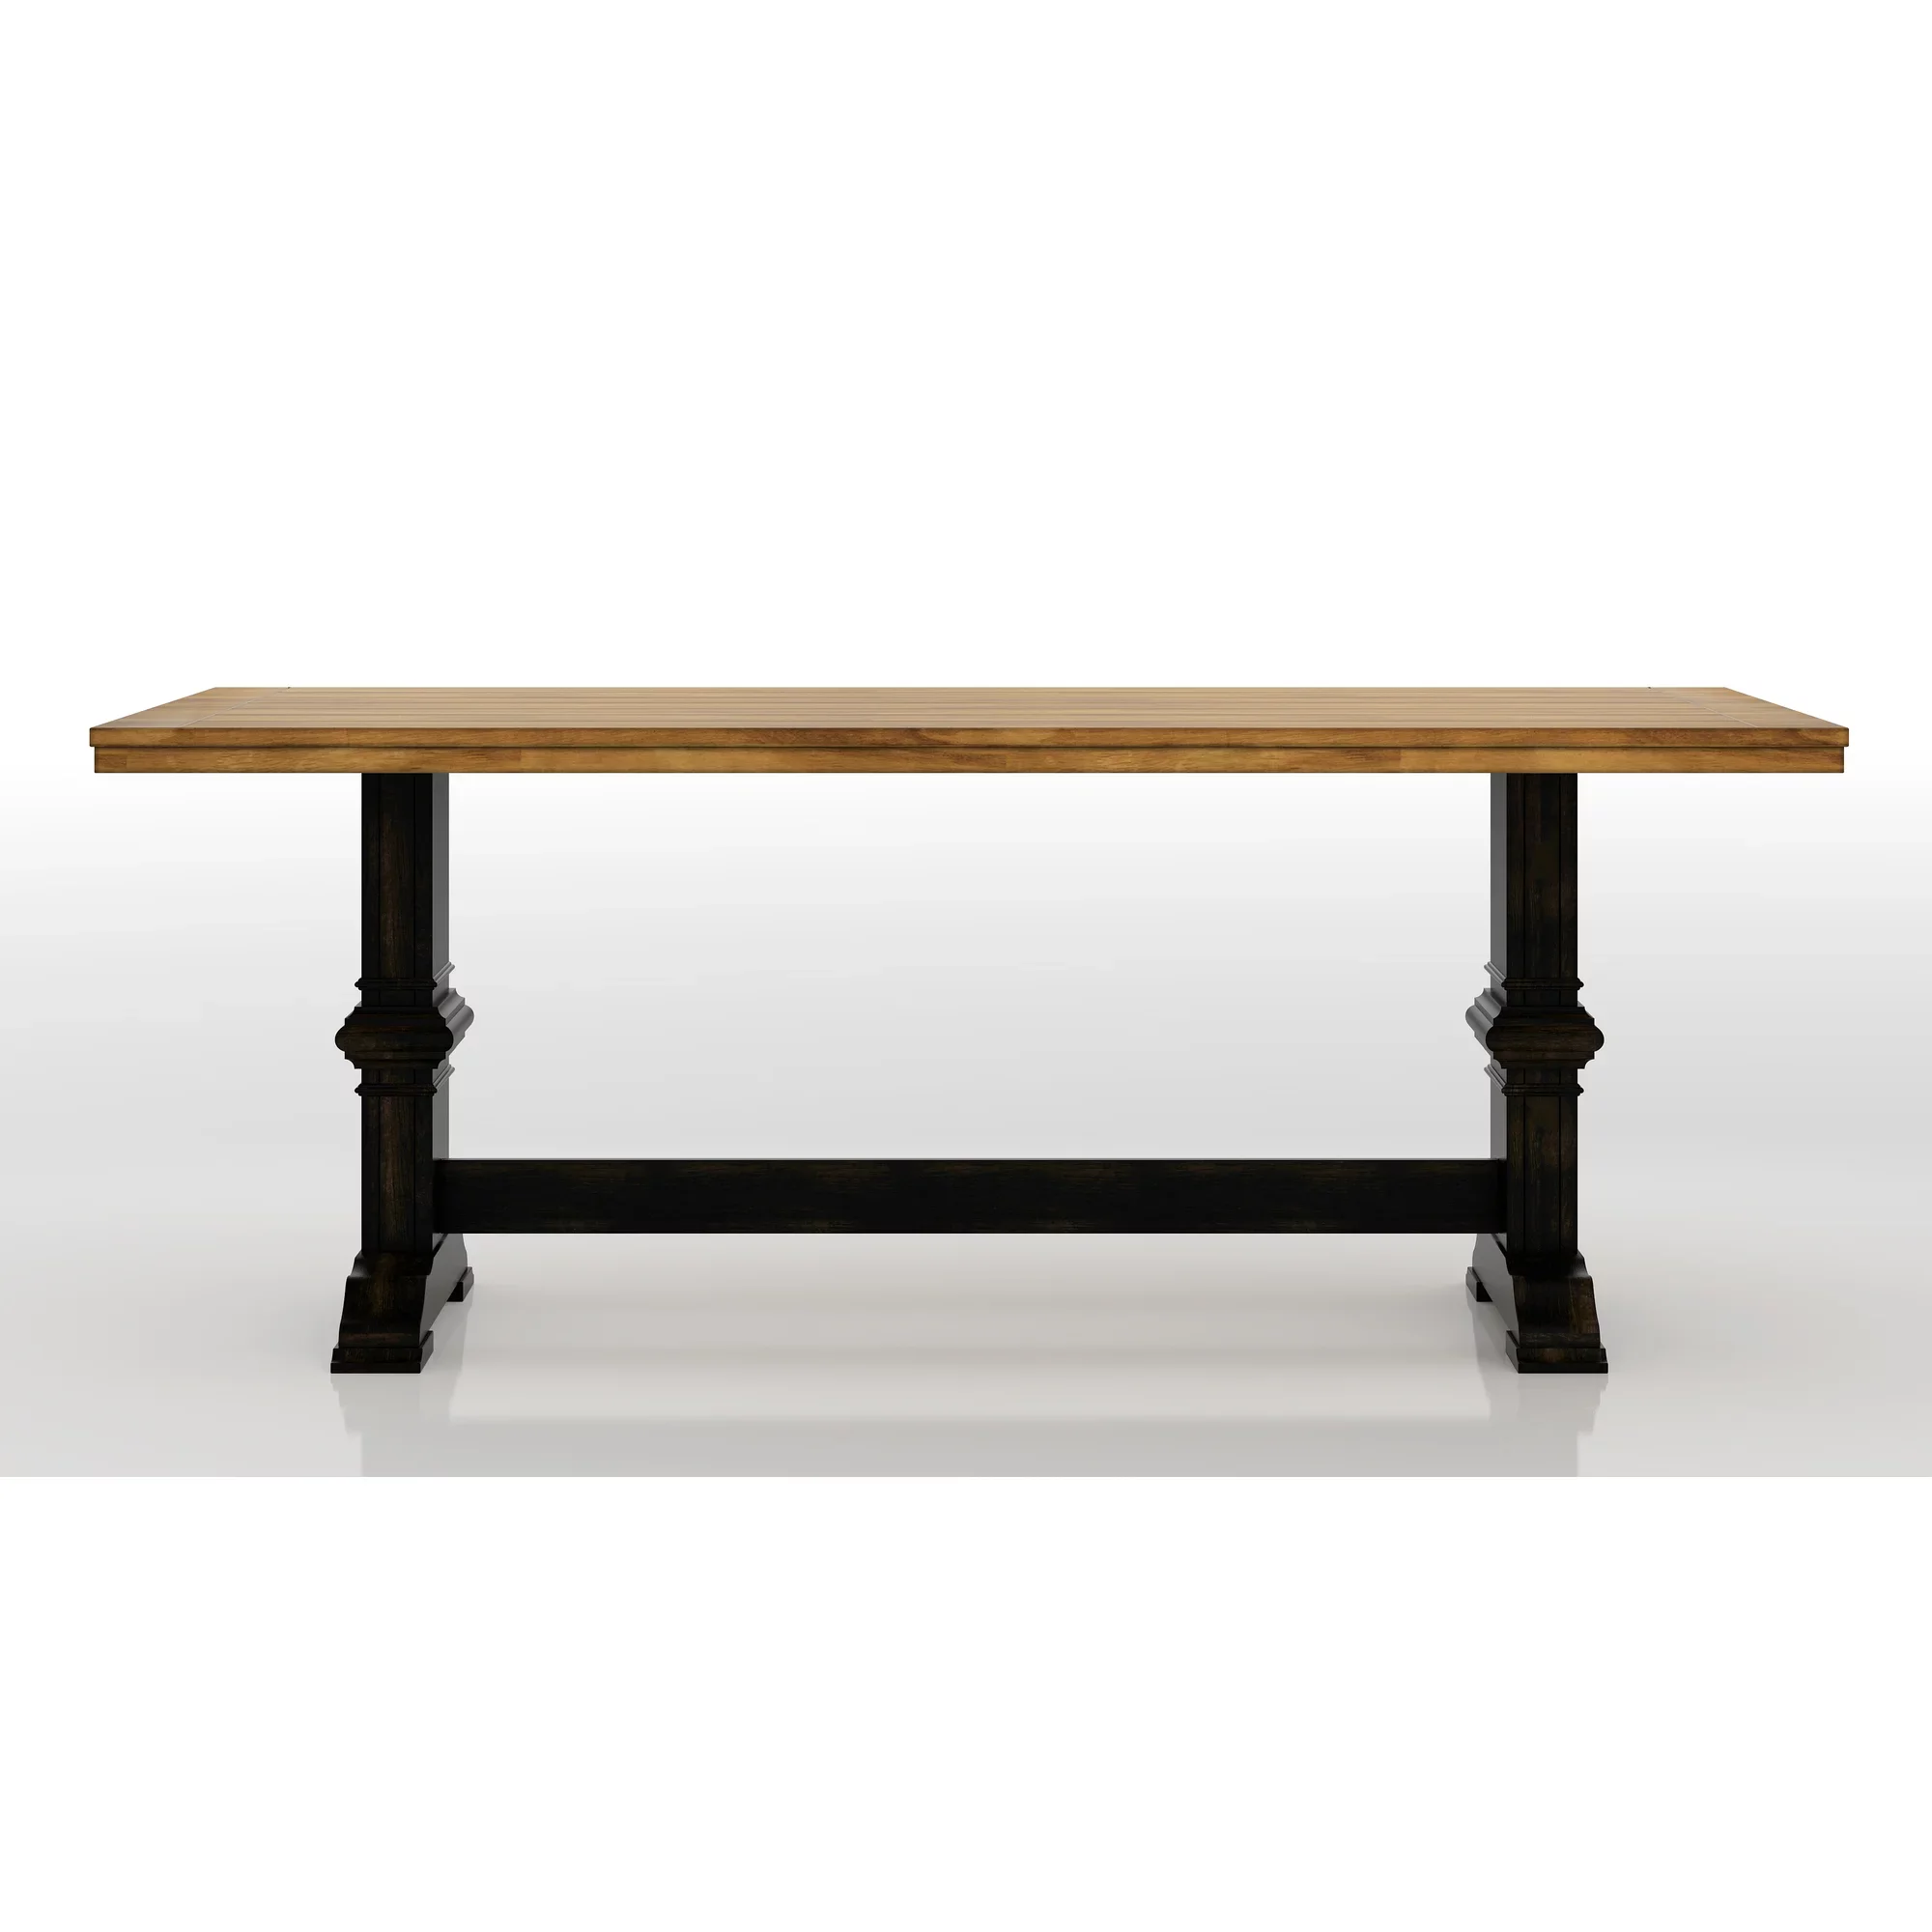 Ullin Rubber Solid Wood Dining Table